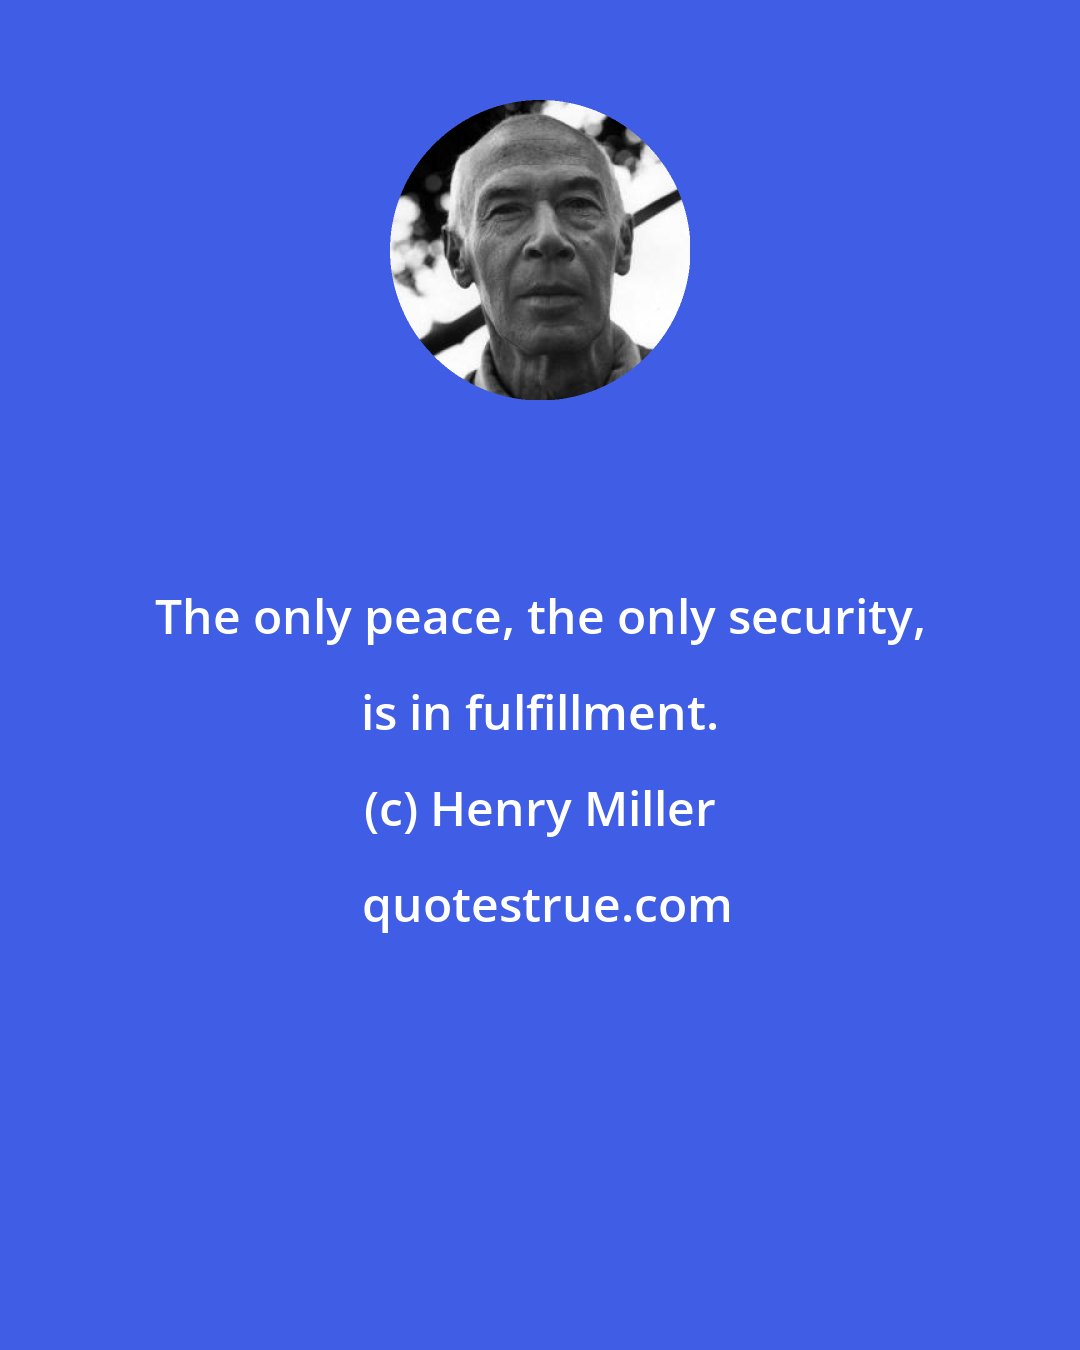 Henry Miller: The only peace, the only security, is in fulfillment.